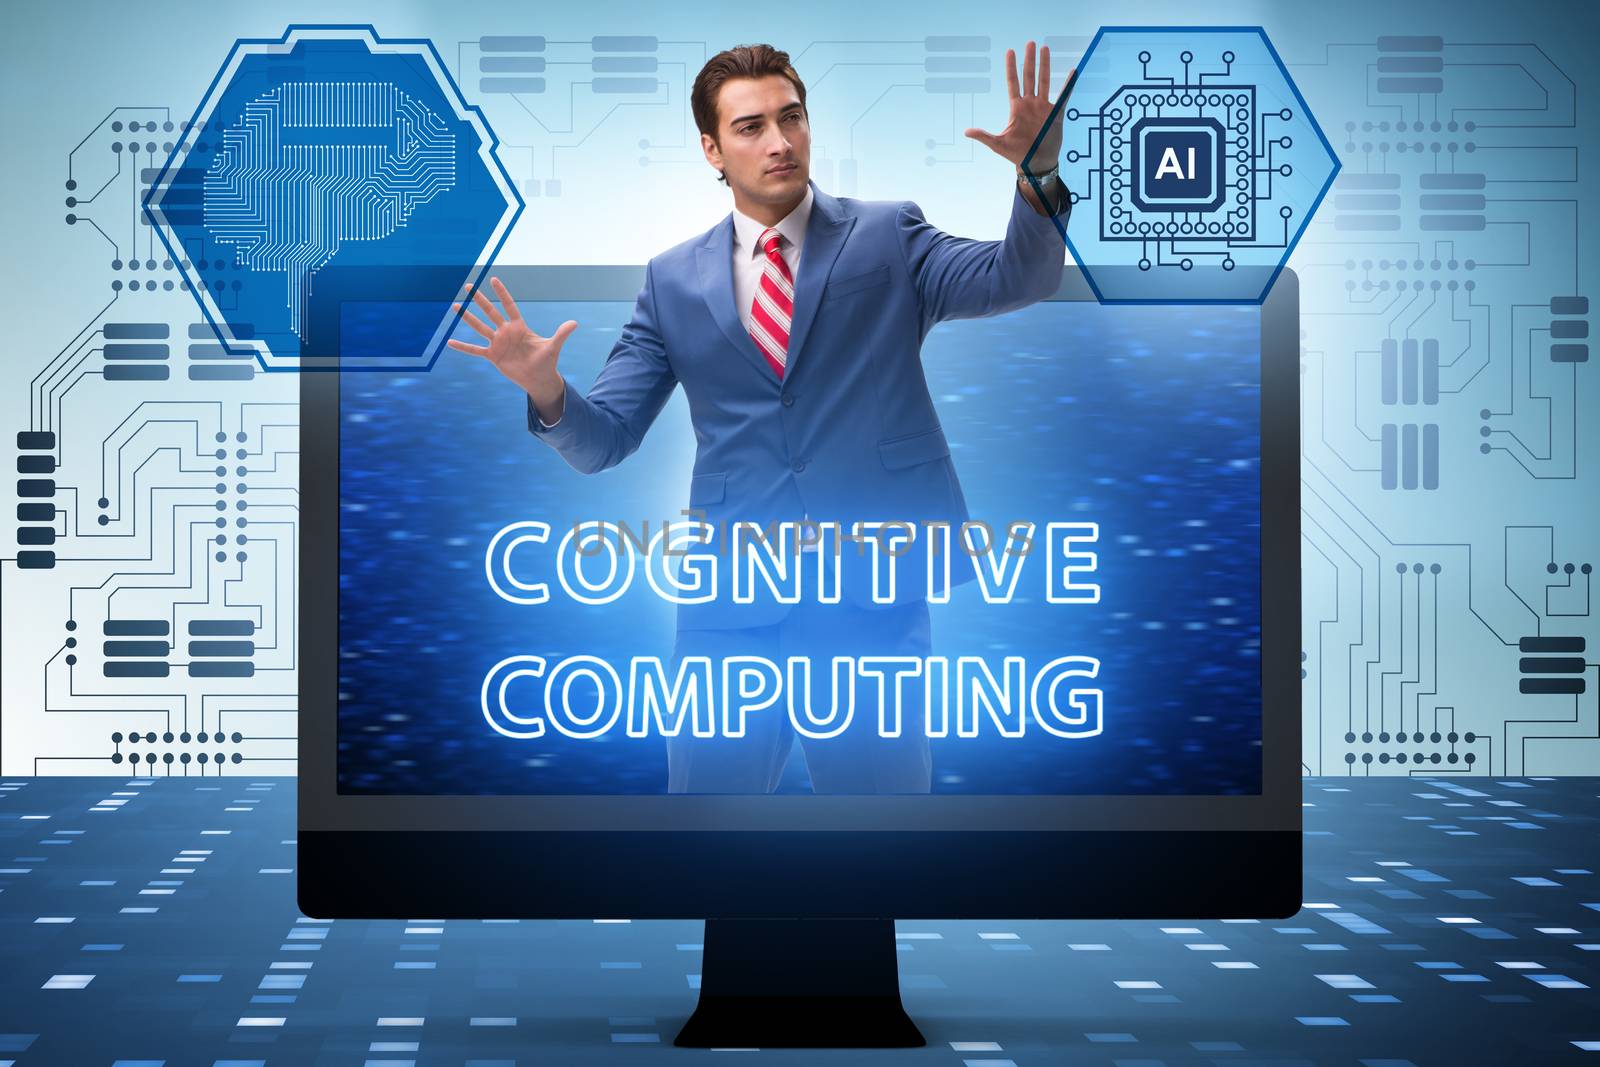 Cognitive computing concept as modern technology by Elnur